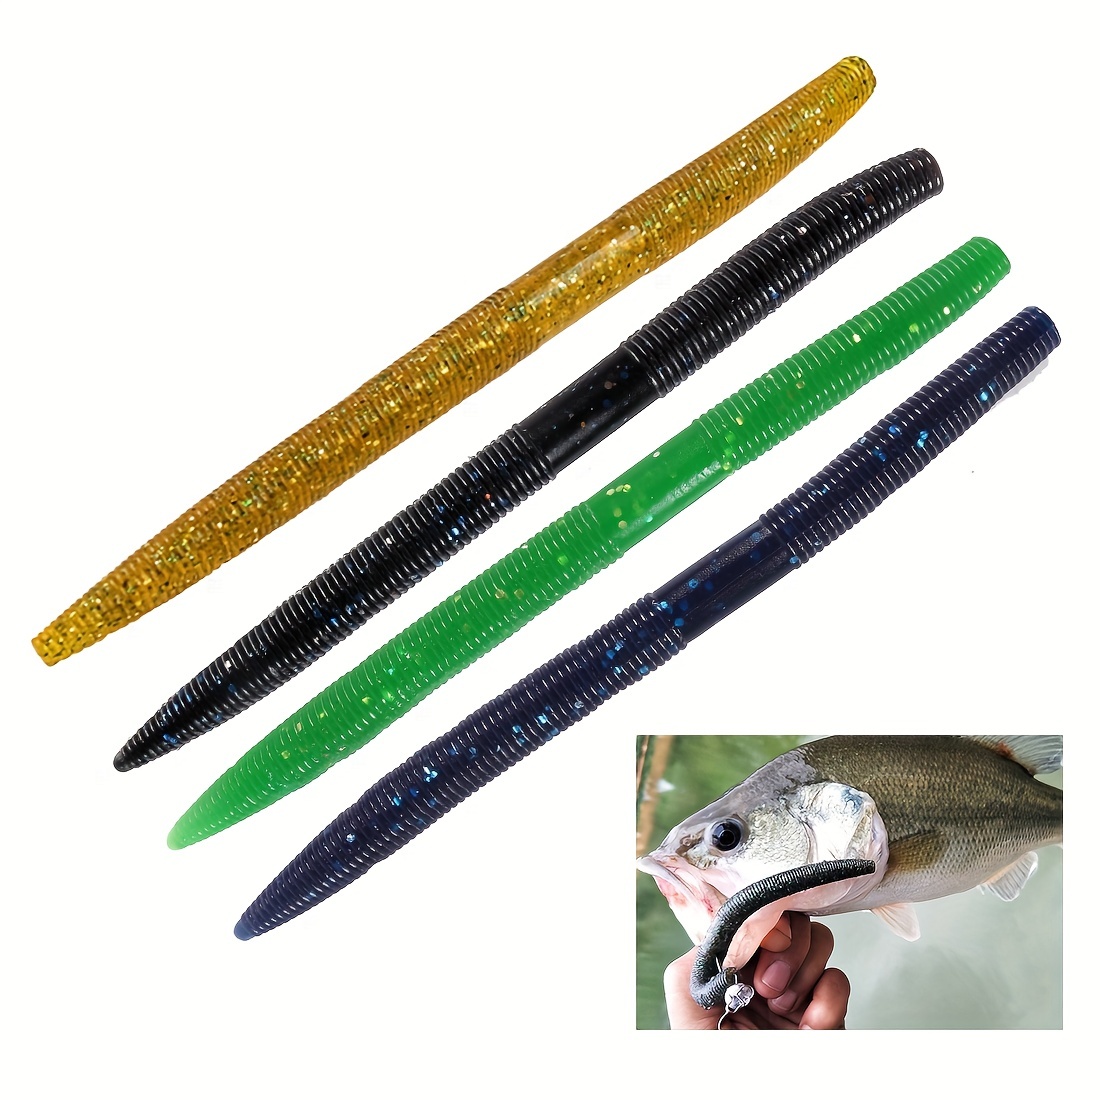 10pcs Bionic Soft Worm Fishing Lures - Slow Sinking, No Sinker Rig -  Fishing Tackle & Accessories